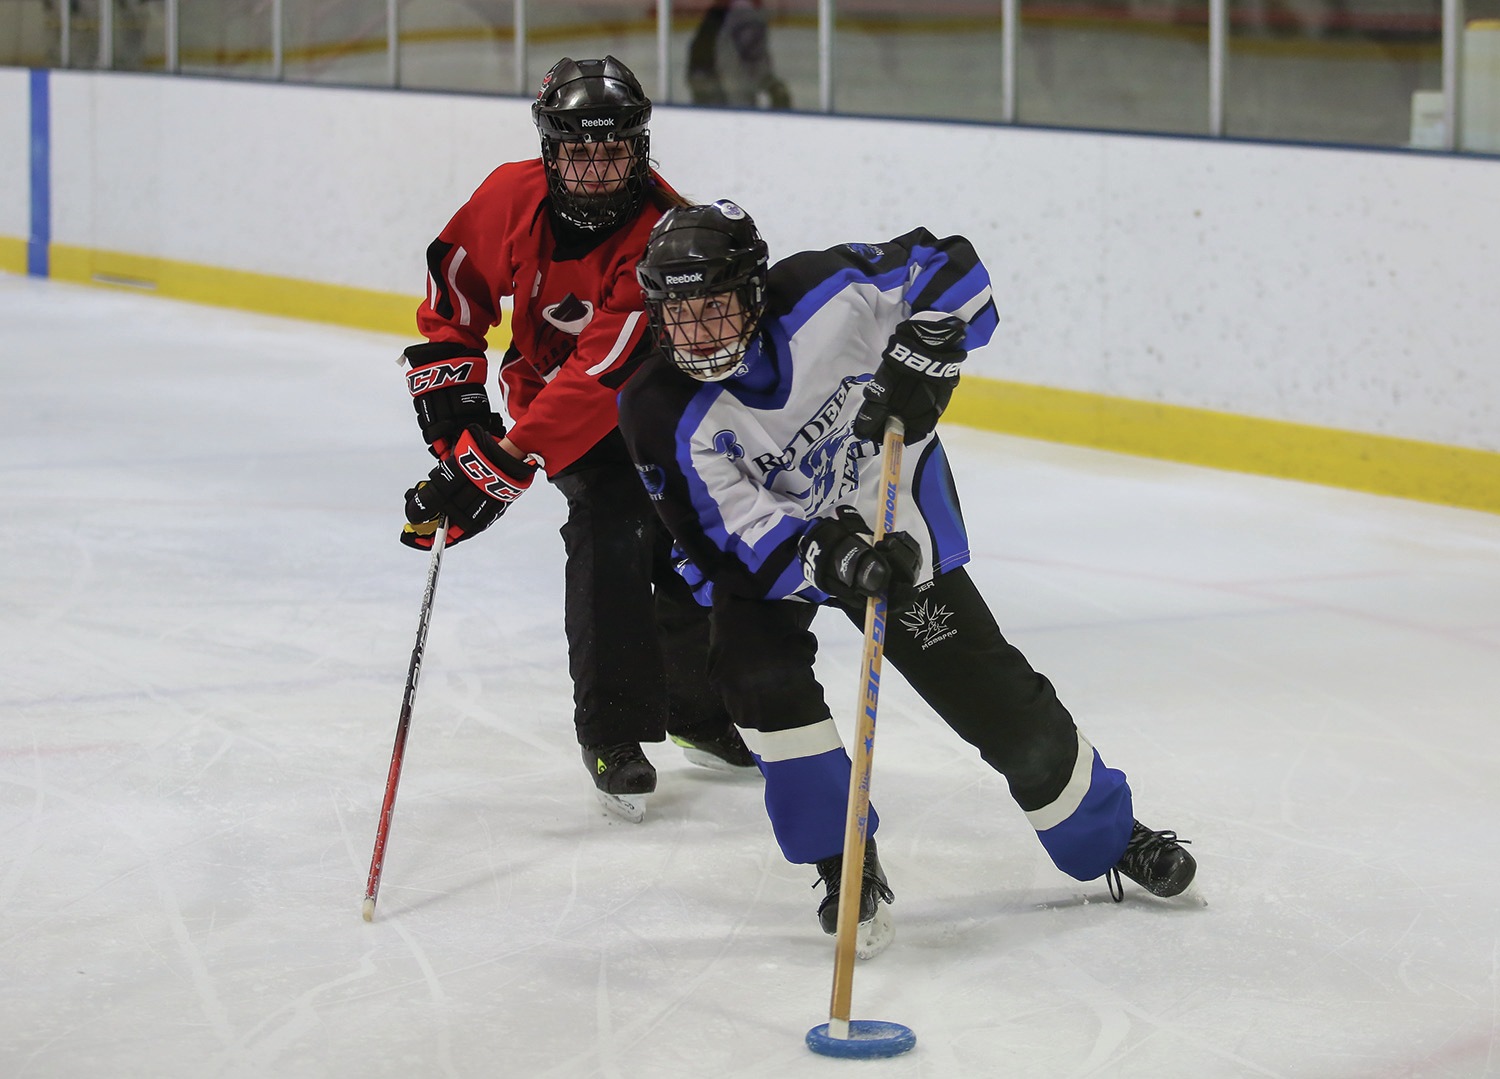 RINGETTE RIOT - From right